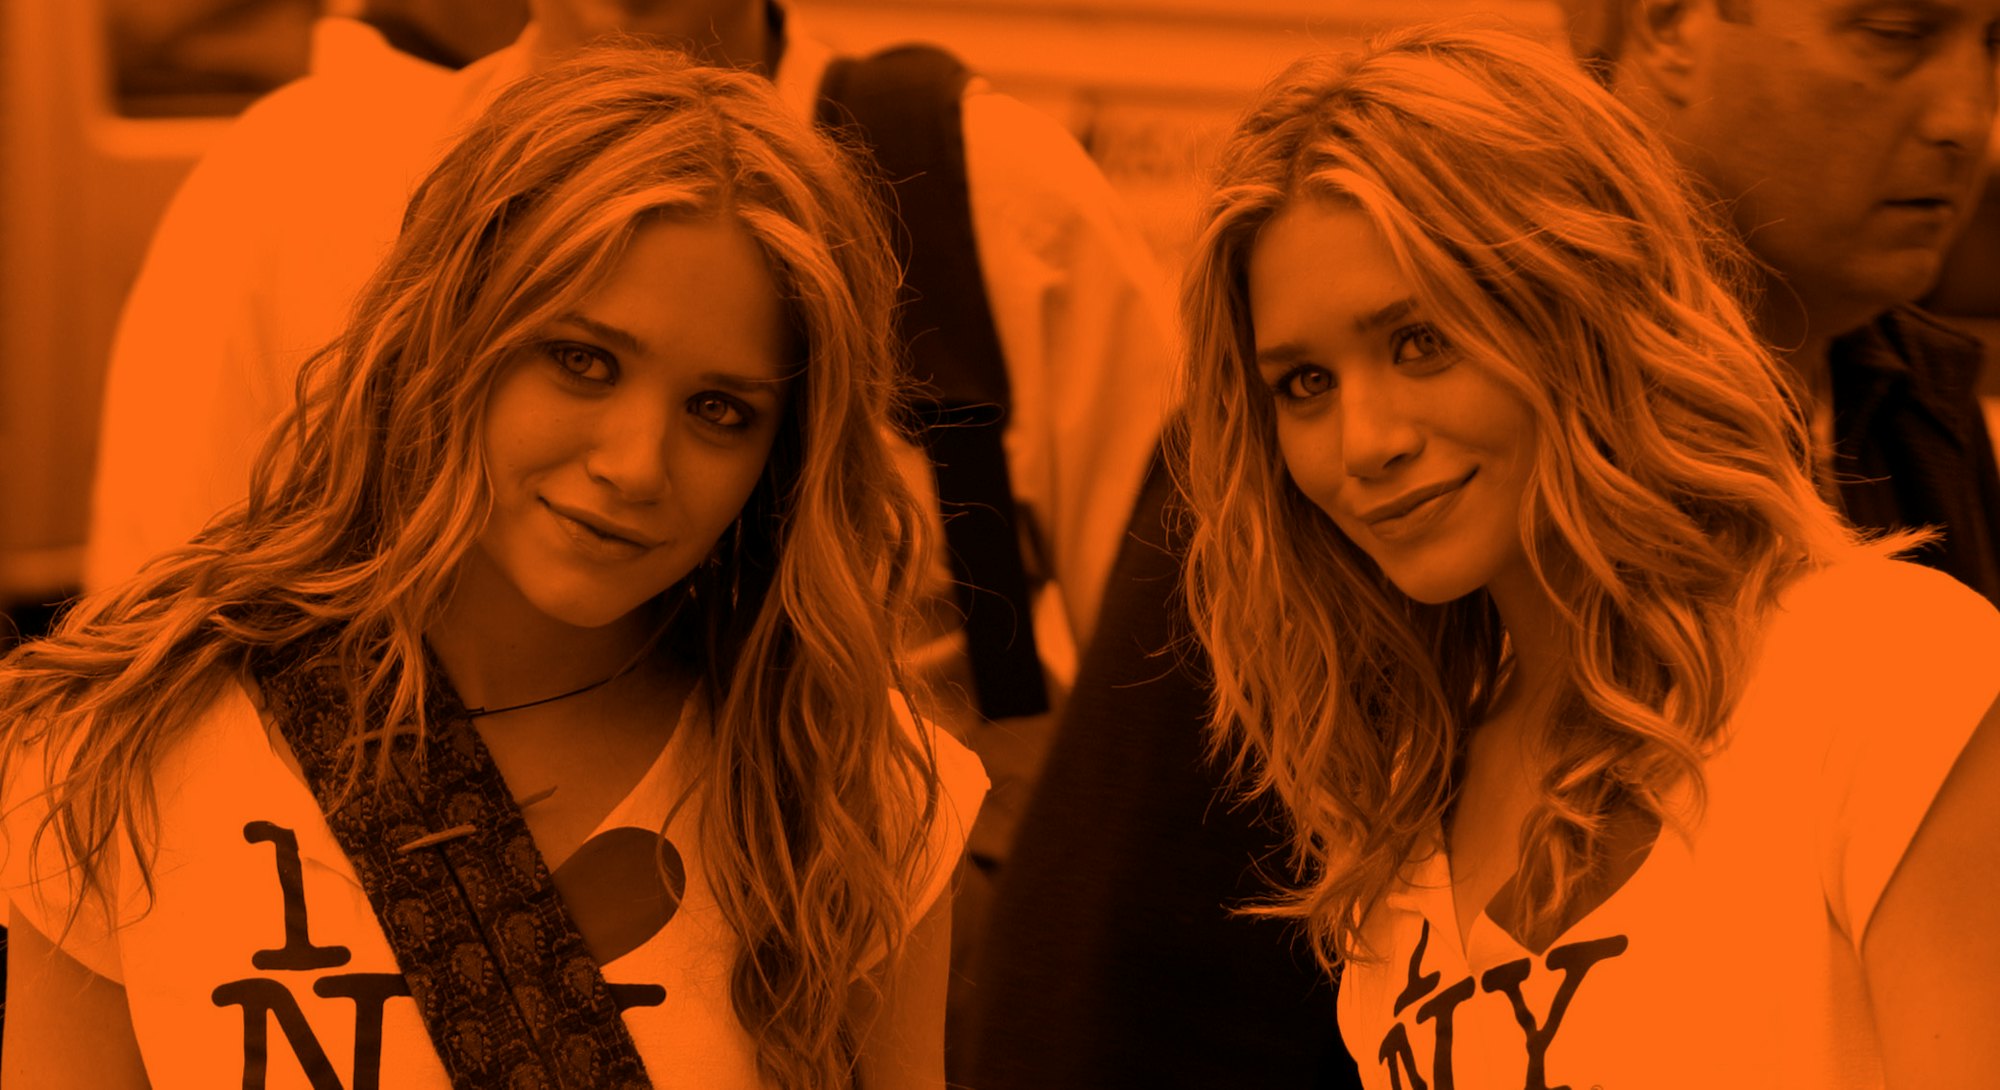 Mary Kate Olsen and Ashley Olsen during "New York Minute" on Location in Manhattan - October 9, 2003...